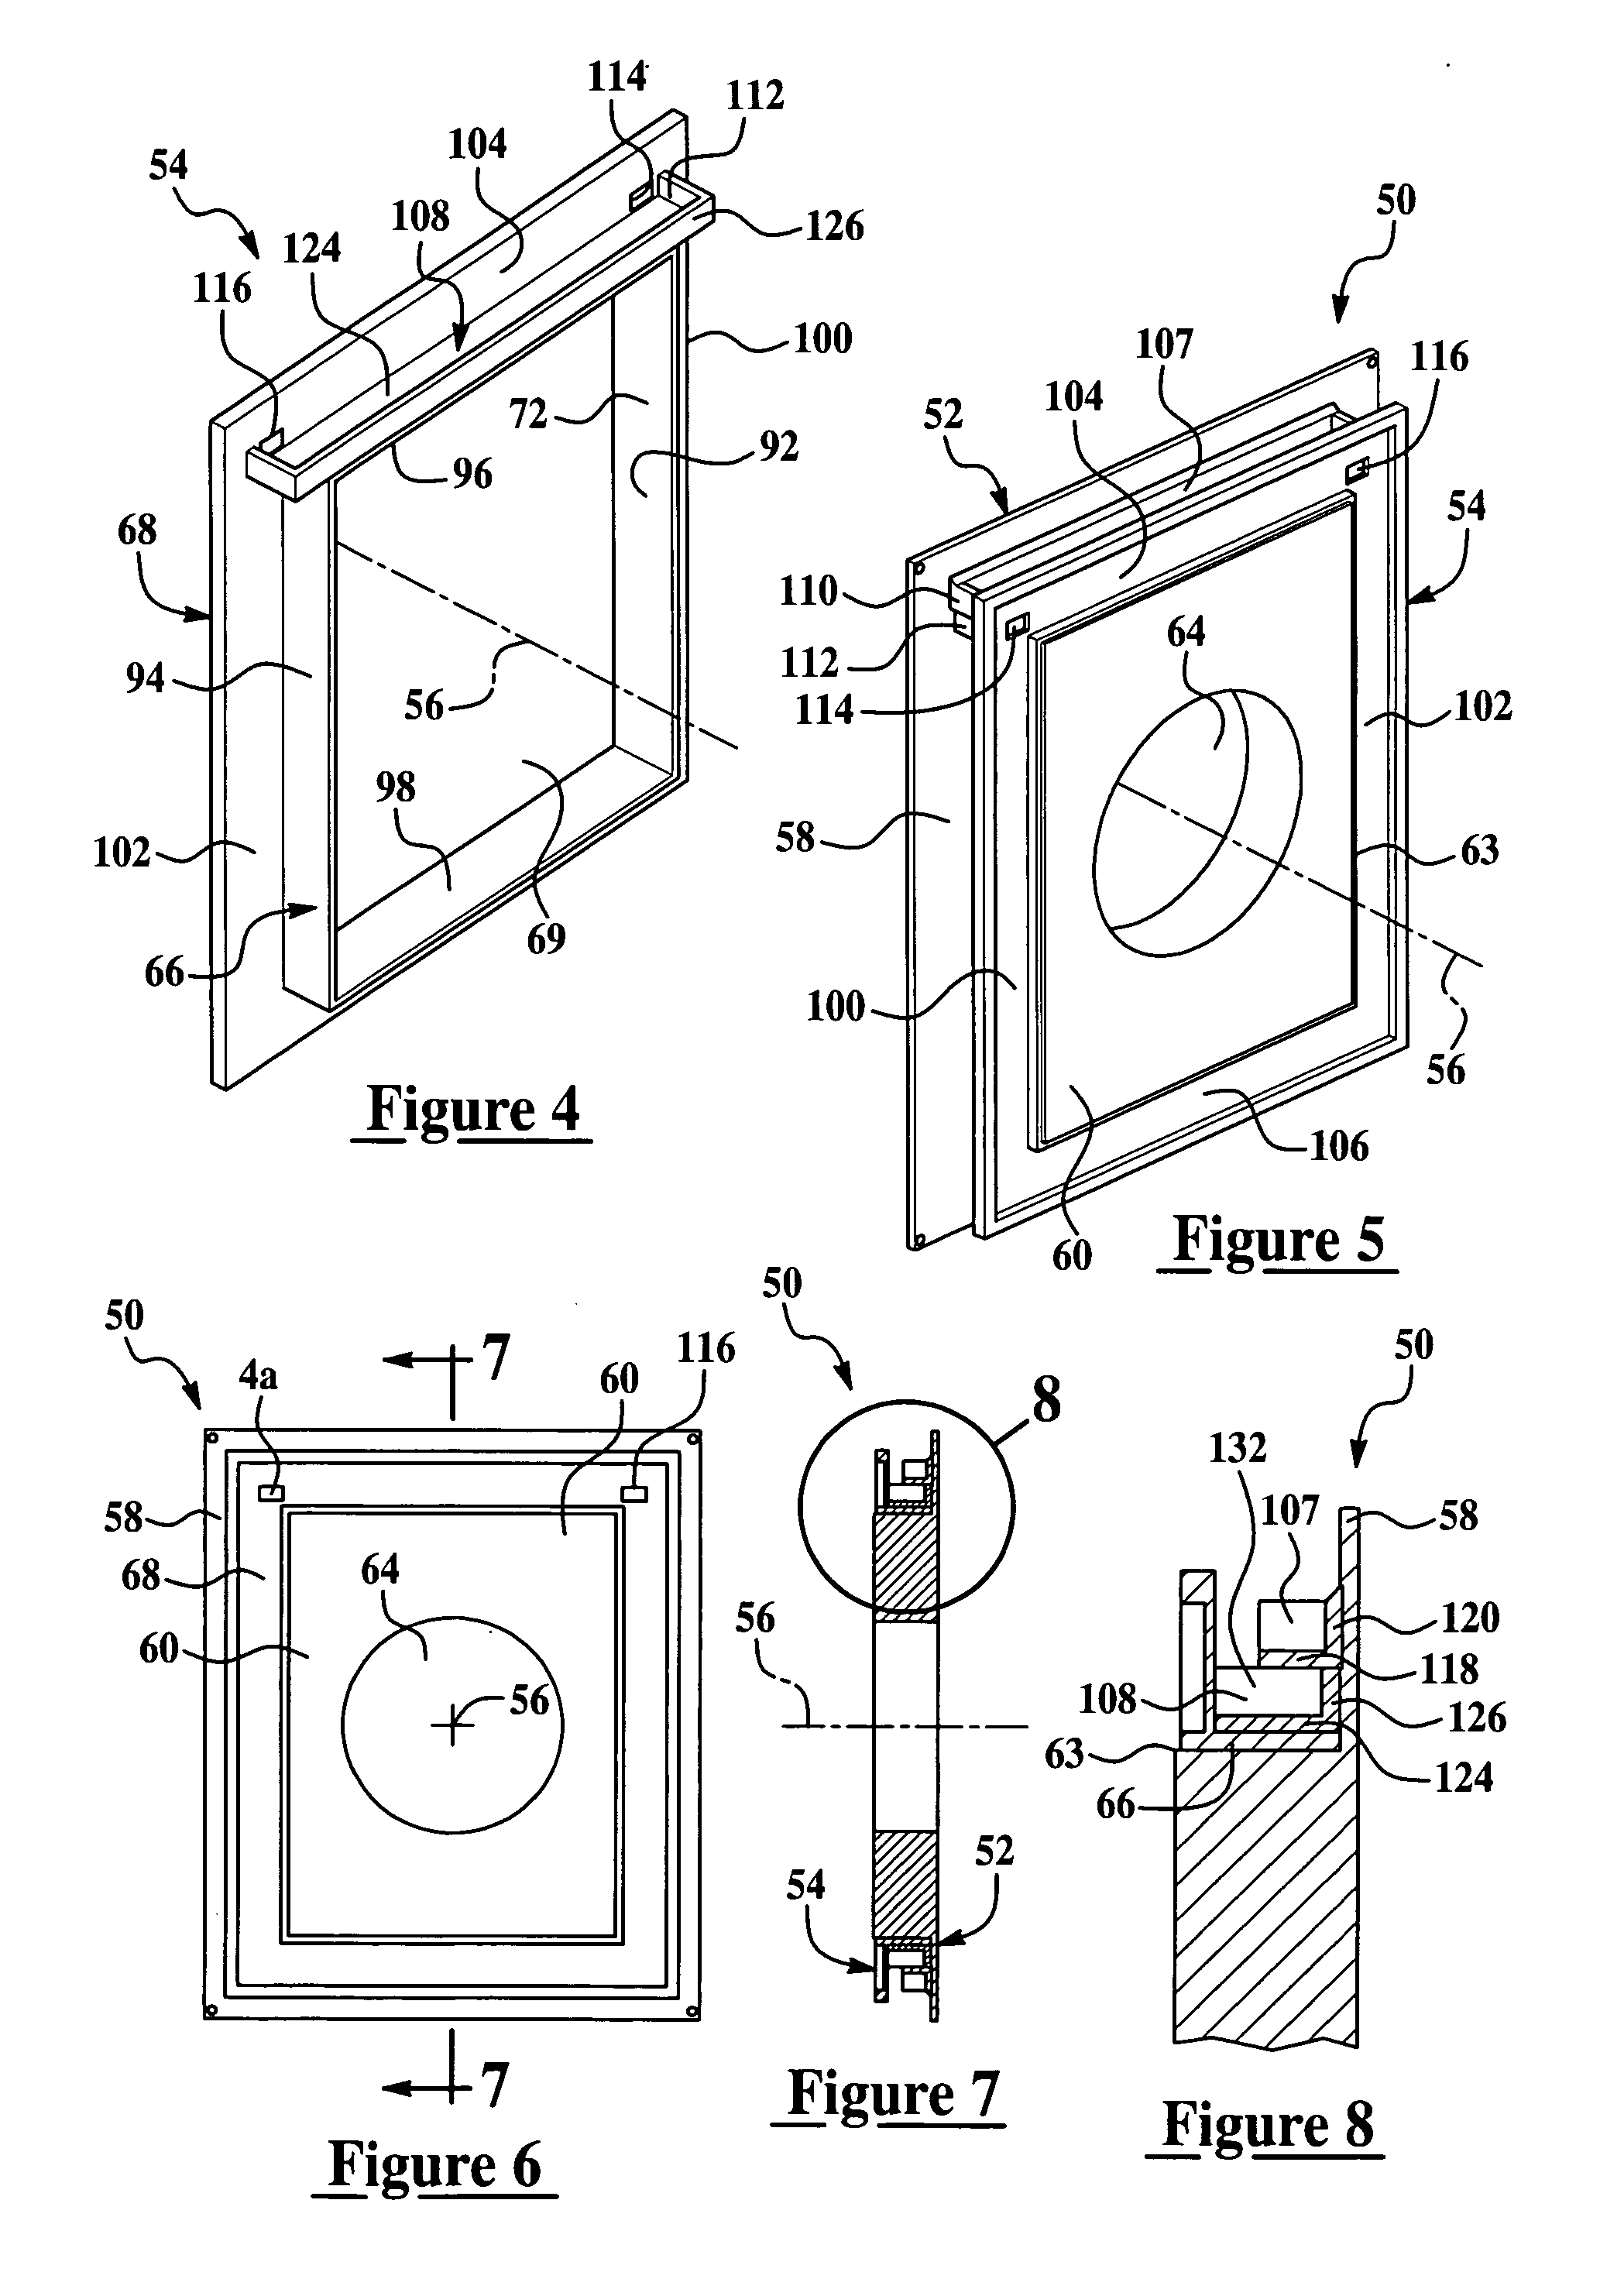 Exterior siding mounting brackets with a water diversion device